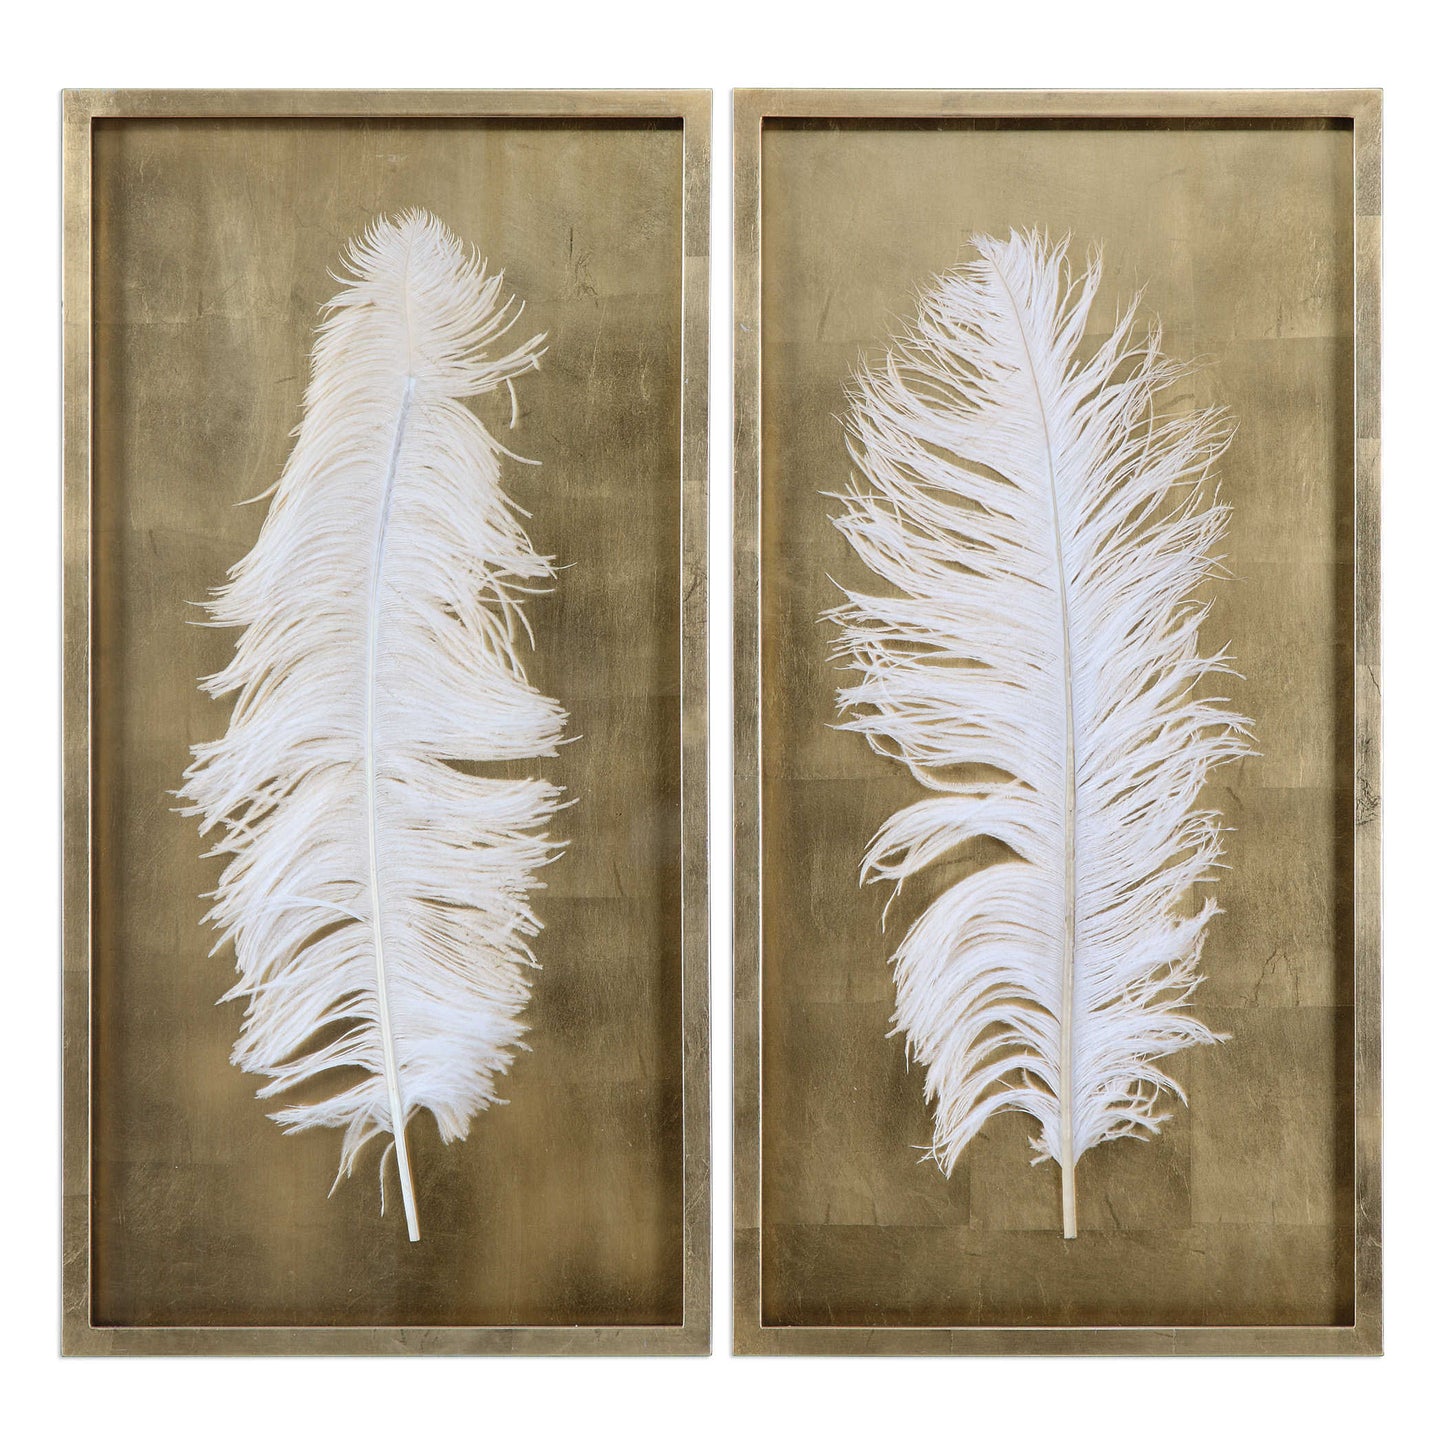 WHITE FEATHERS SHADOW BOXES, S/2